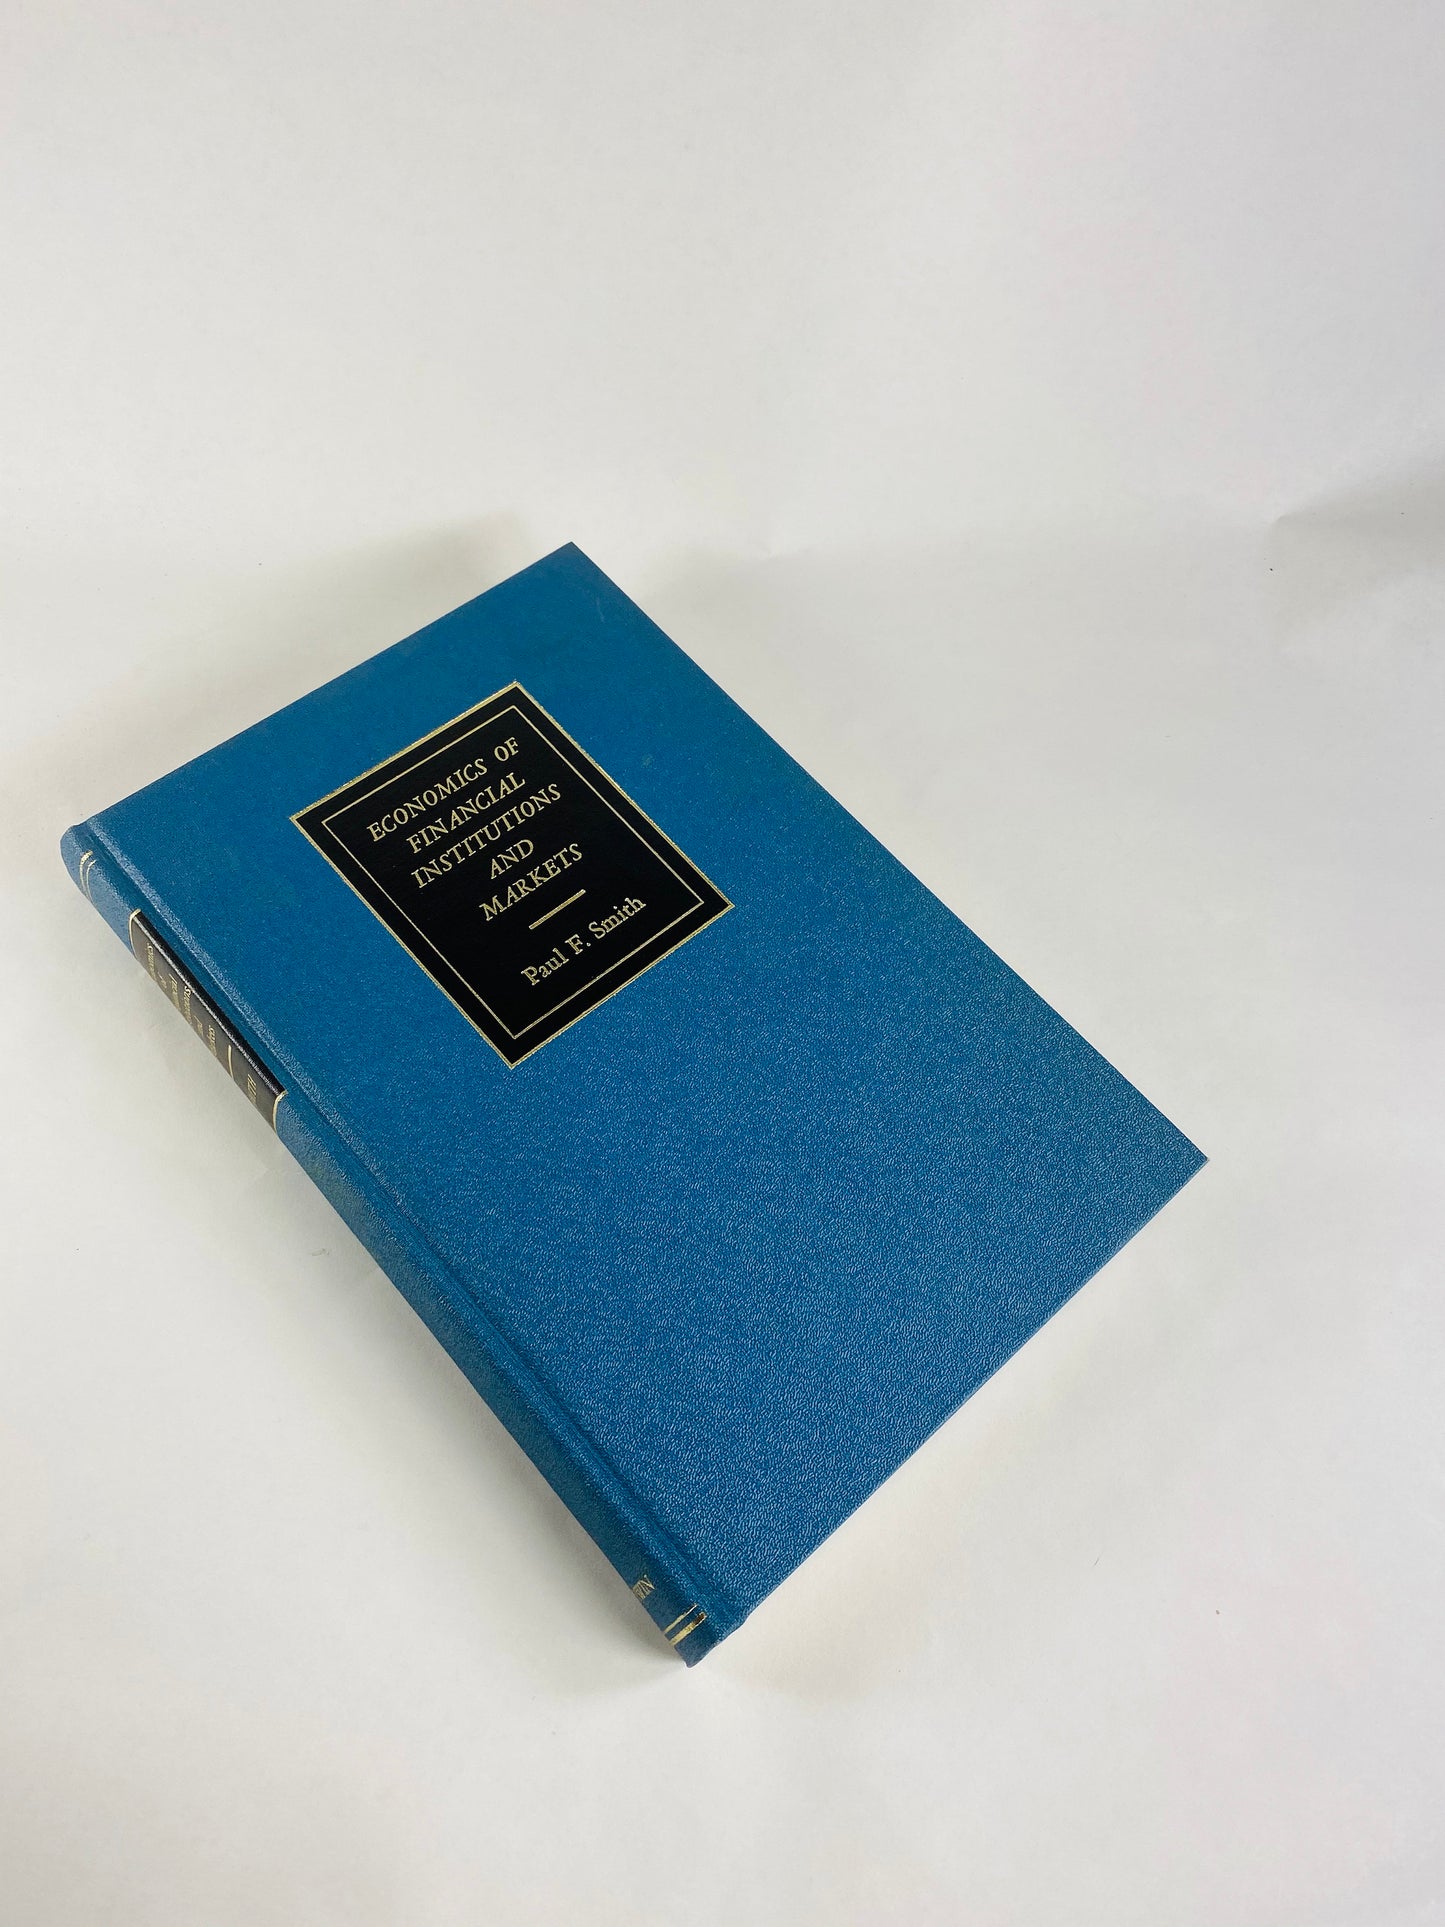 Economics of Financial Institutions and Markets FIRST EDITION vintage textbook by Paul Smith circa 1971. Blue home office decor